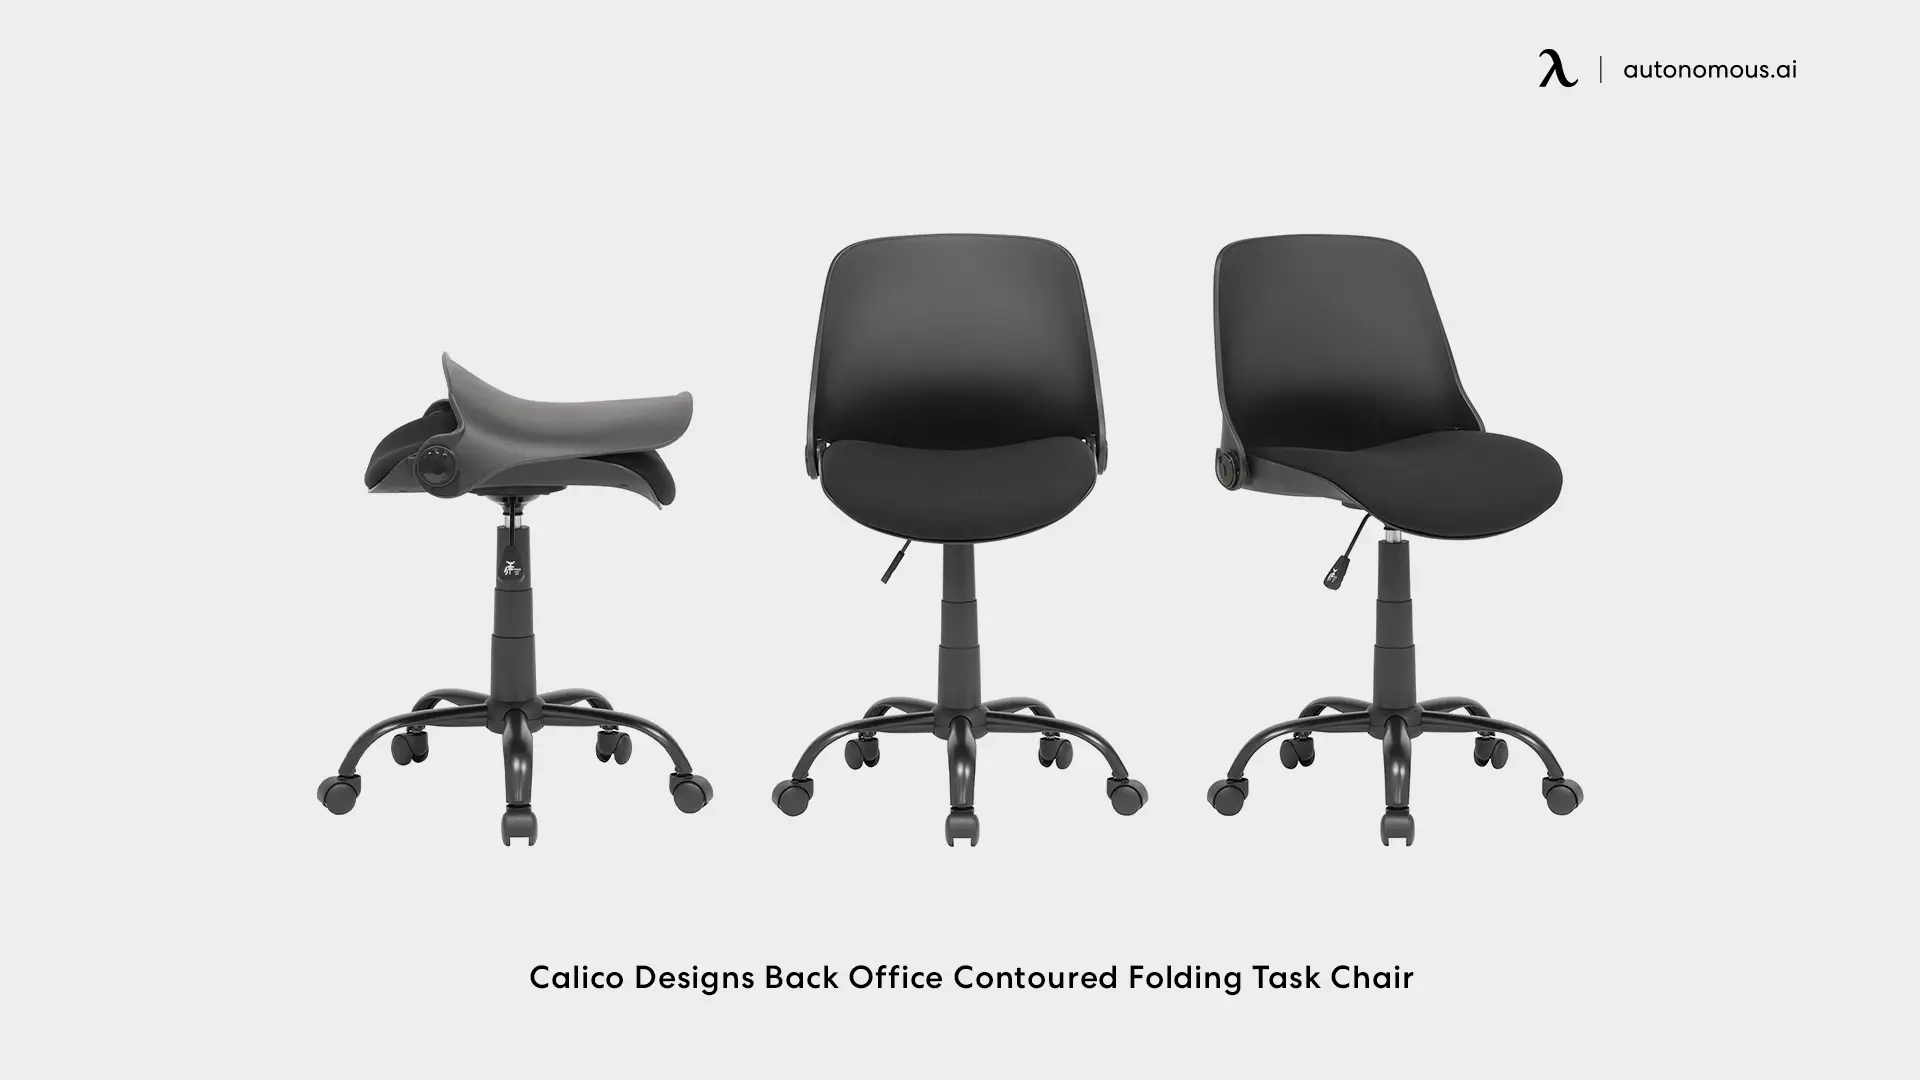 Calico Designs Back Office Contoured Folding Task Chair